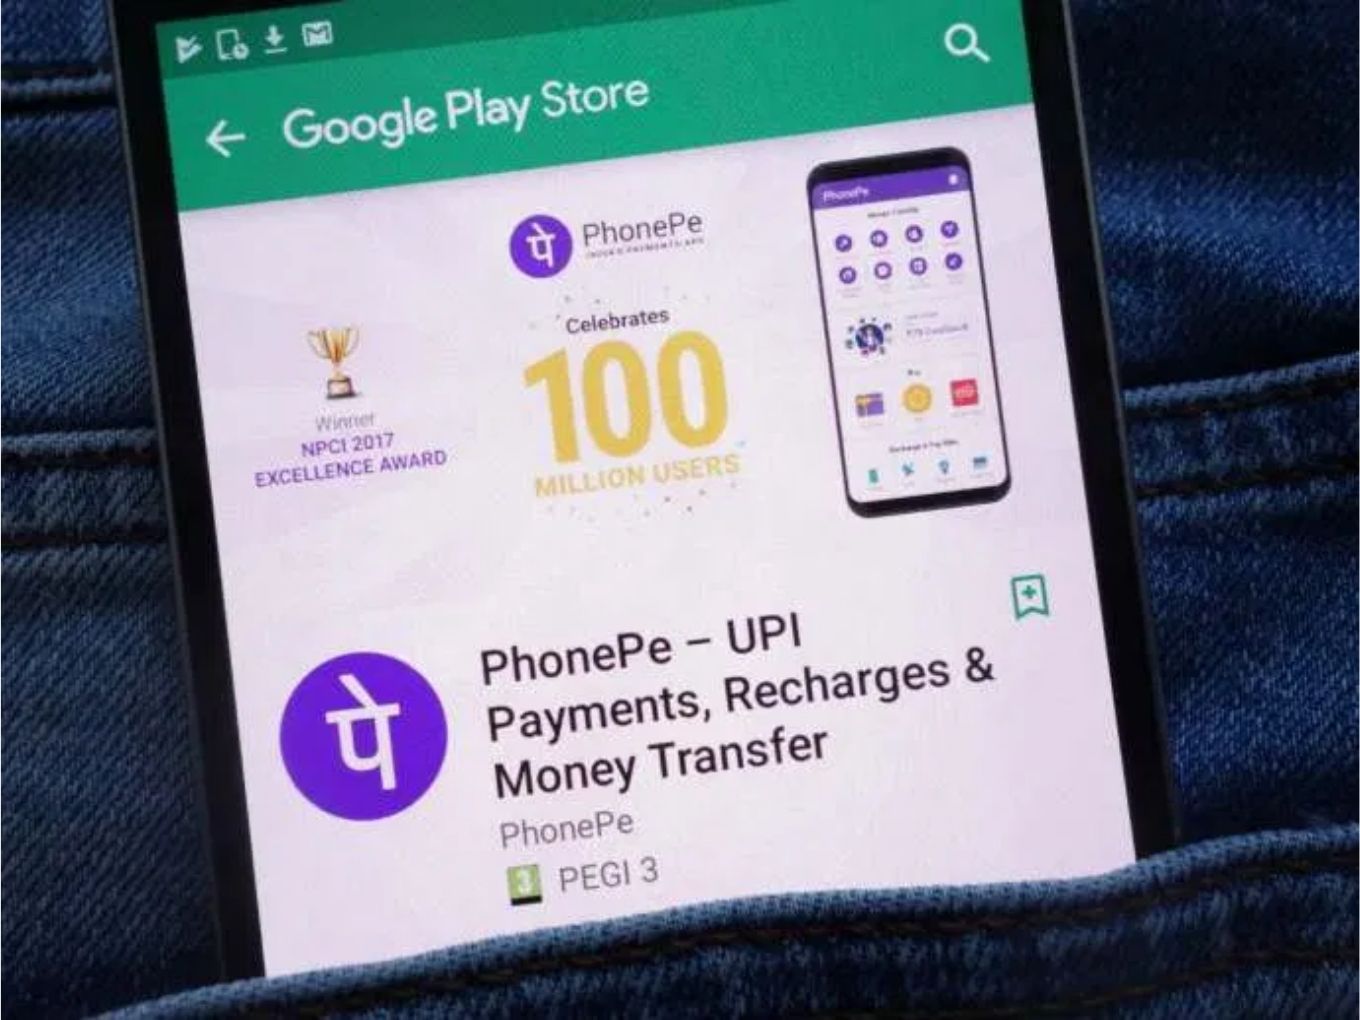 Phonepe Needs 3 To 4 Years To Become Profitable: CEO Sameer Nigam